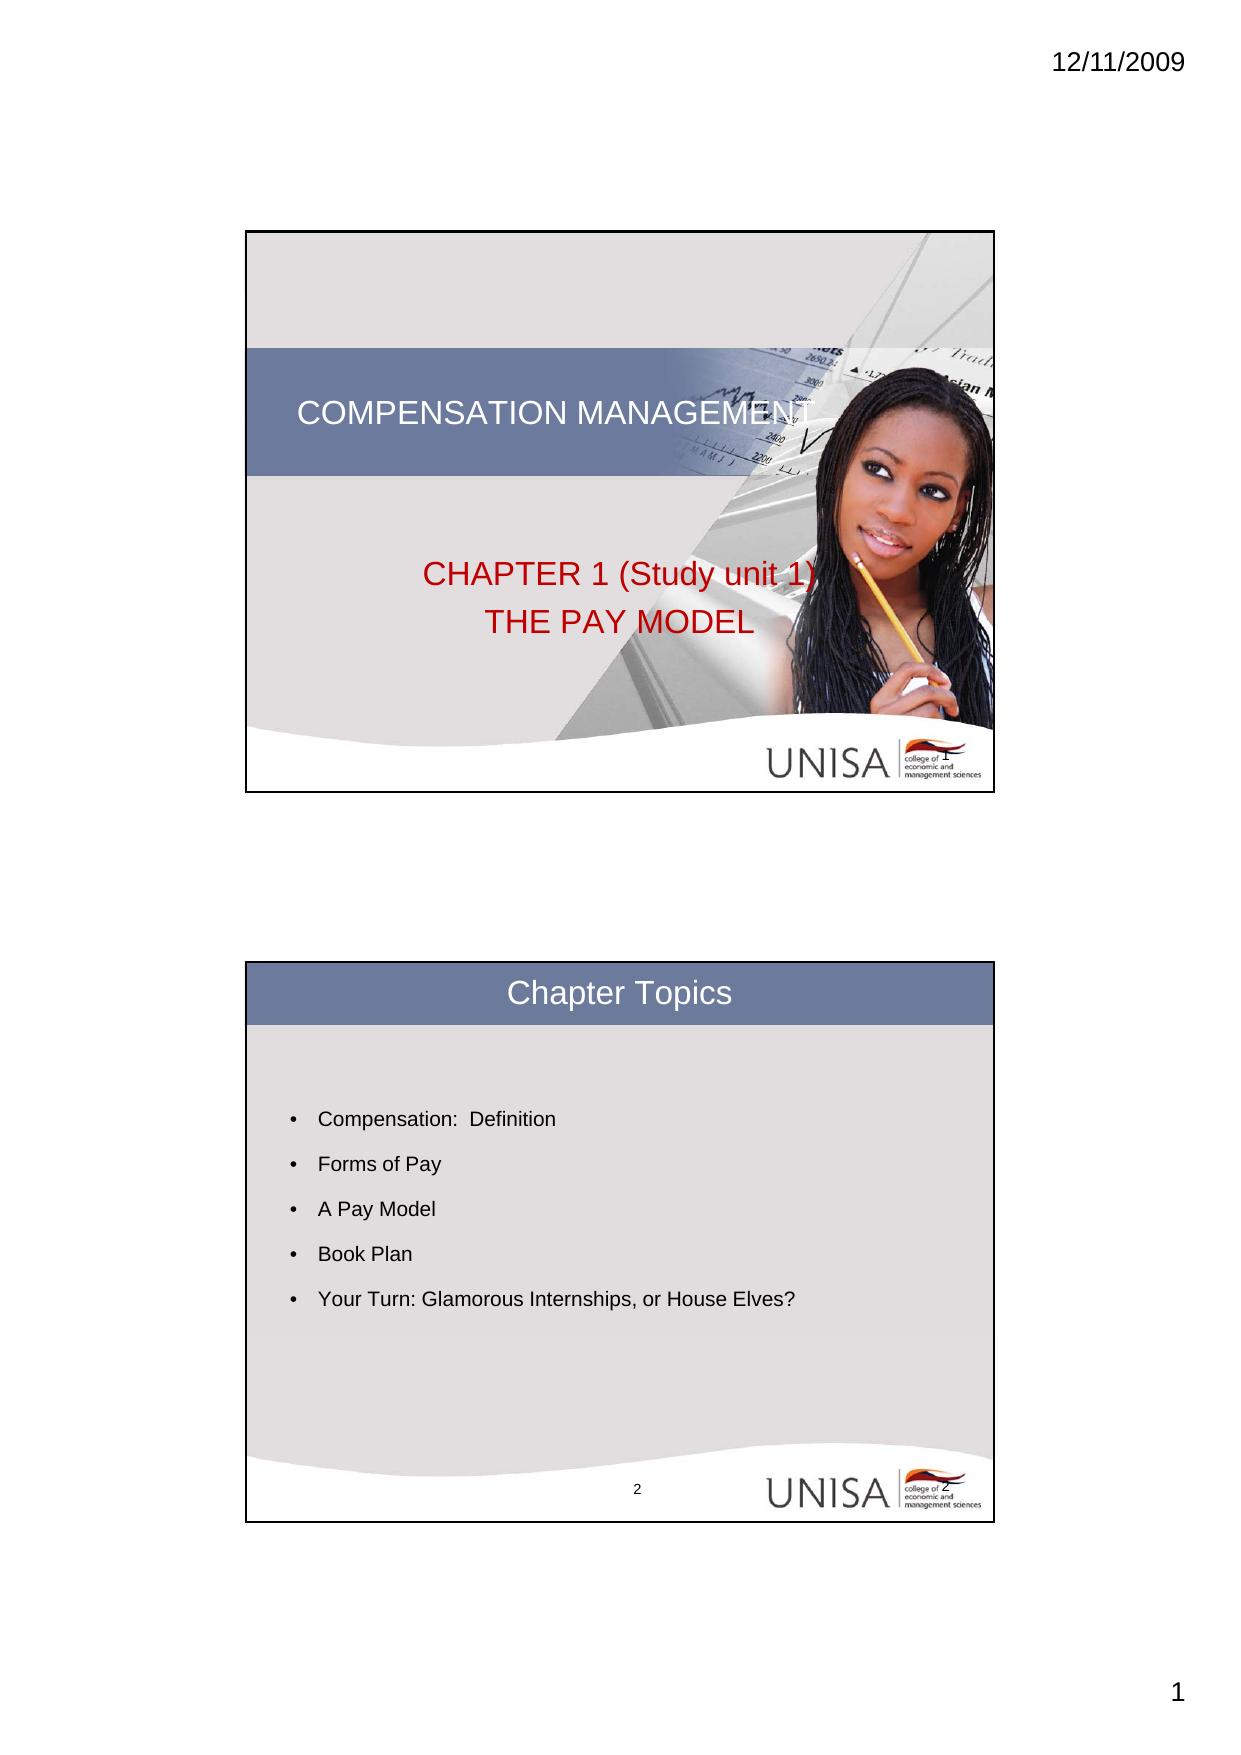 Microsoft PowerPoint - Chapter 1 (study unit 1).ppt [Compatibility Mode]